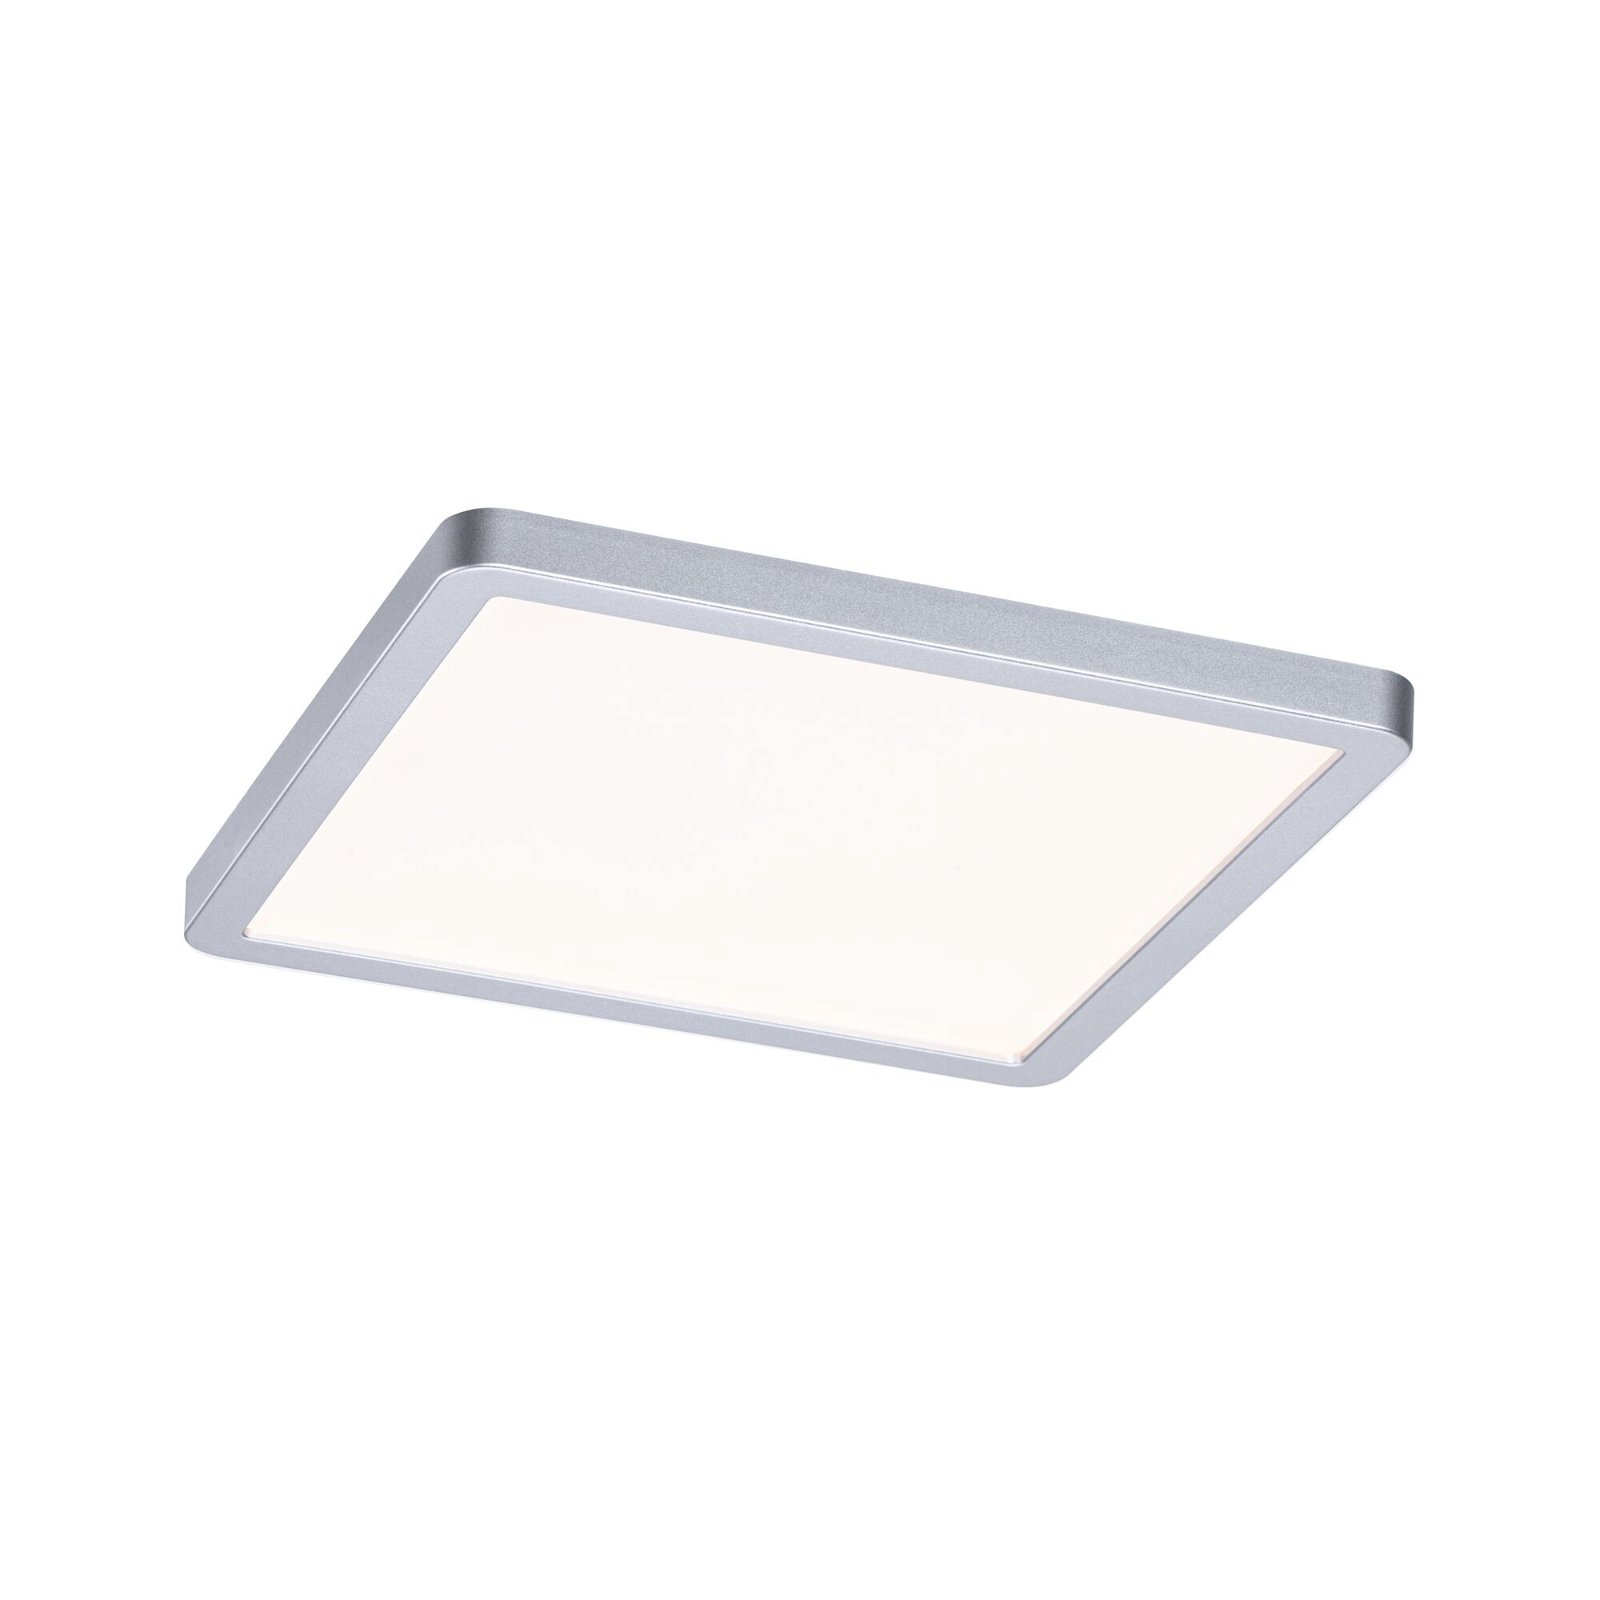 VariFit LED Recessed panel Dim to Warm Areo IP44 square 175x175mm 13W 1200lm 3 Step Dim to warm Chrome matt dimmable